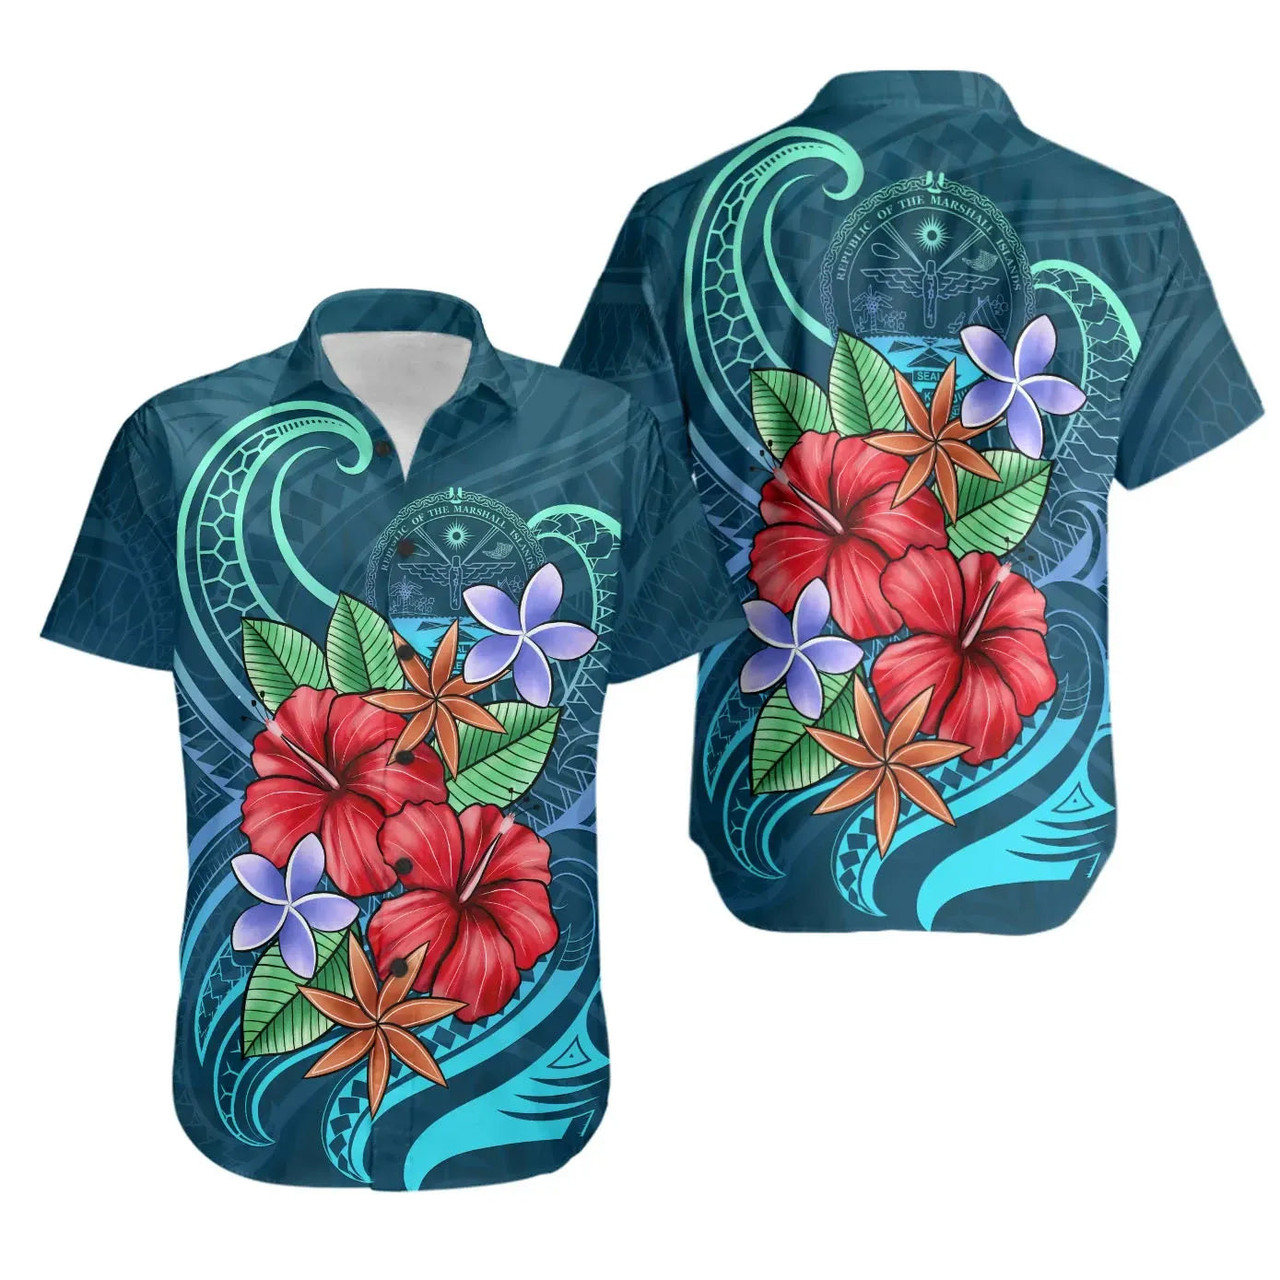 Marshall Islands Hawaiian Shirts - Blue Pattern With Tropical Flowers Crest 1